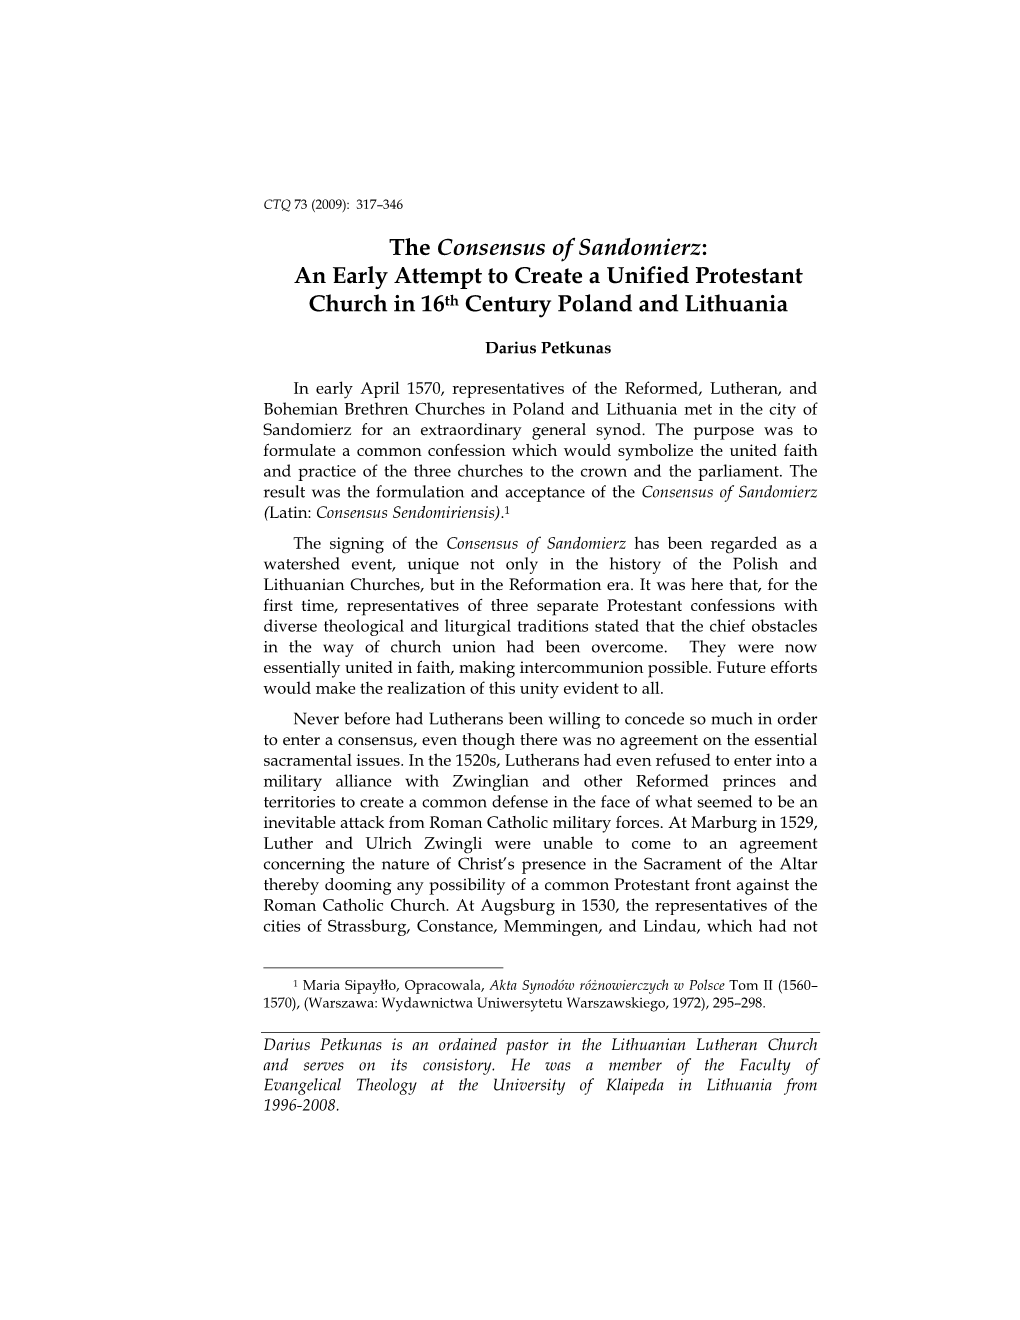 The Consensus of Sandomierz: an Early Attempt to Create a Unified Protestant Church in 16Th Century Poland and Lithuania